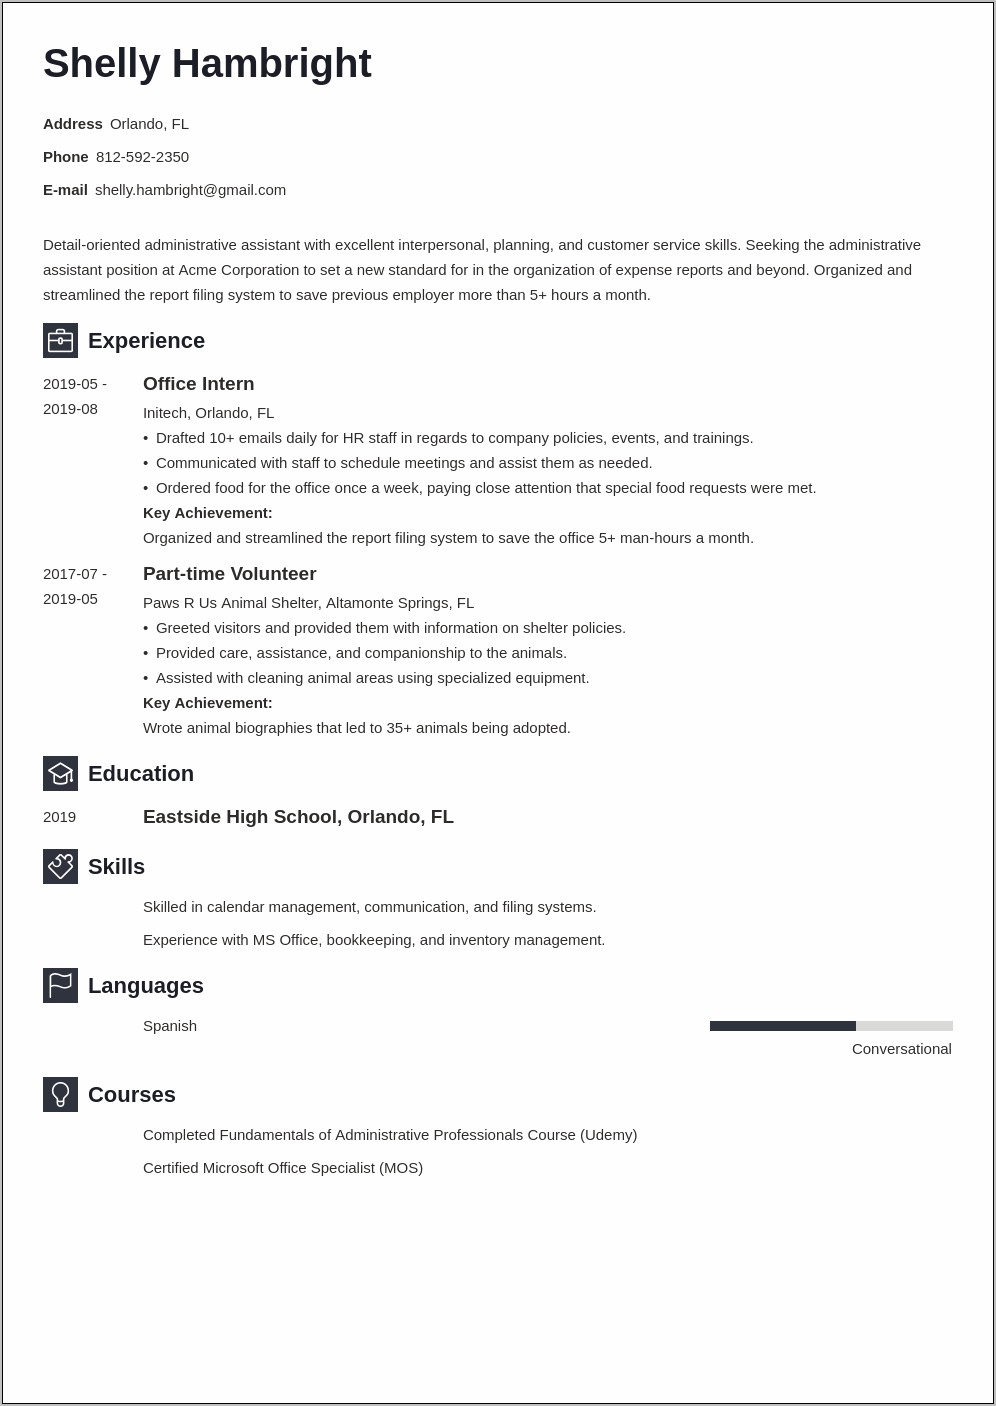 Resume Objective Examples Administrative Assistant Position